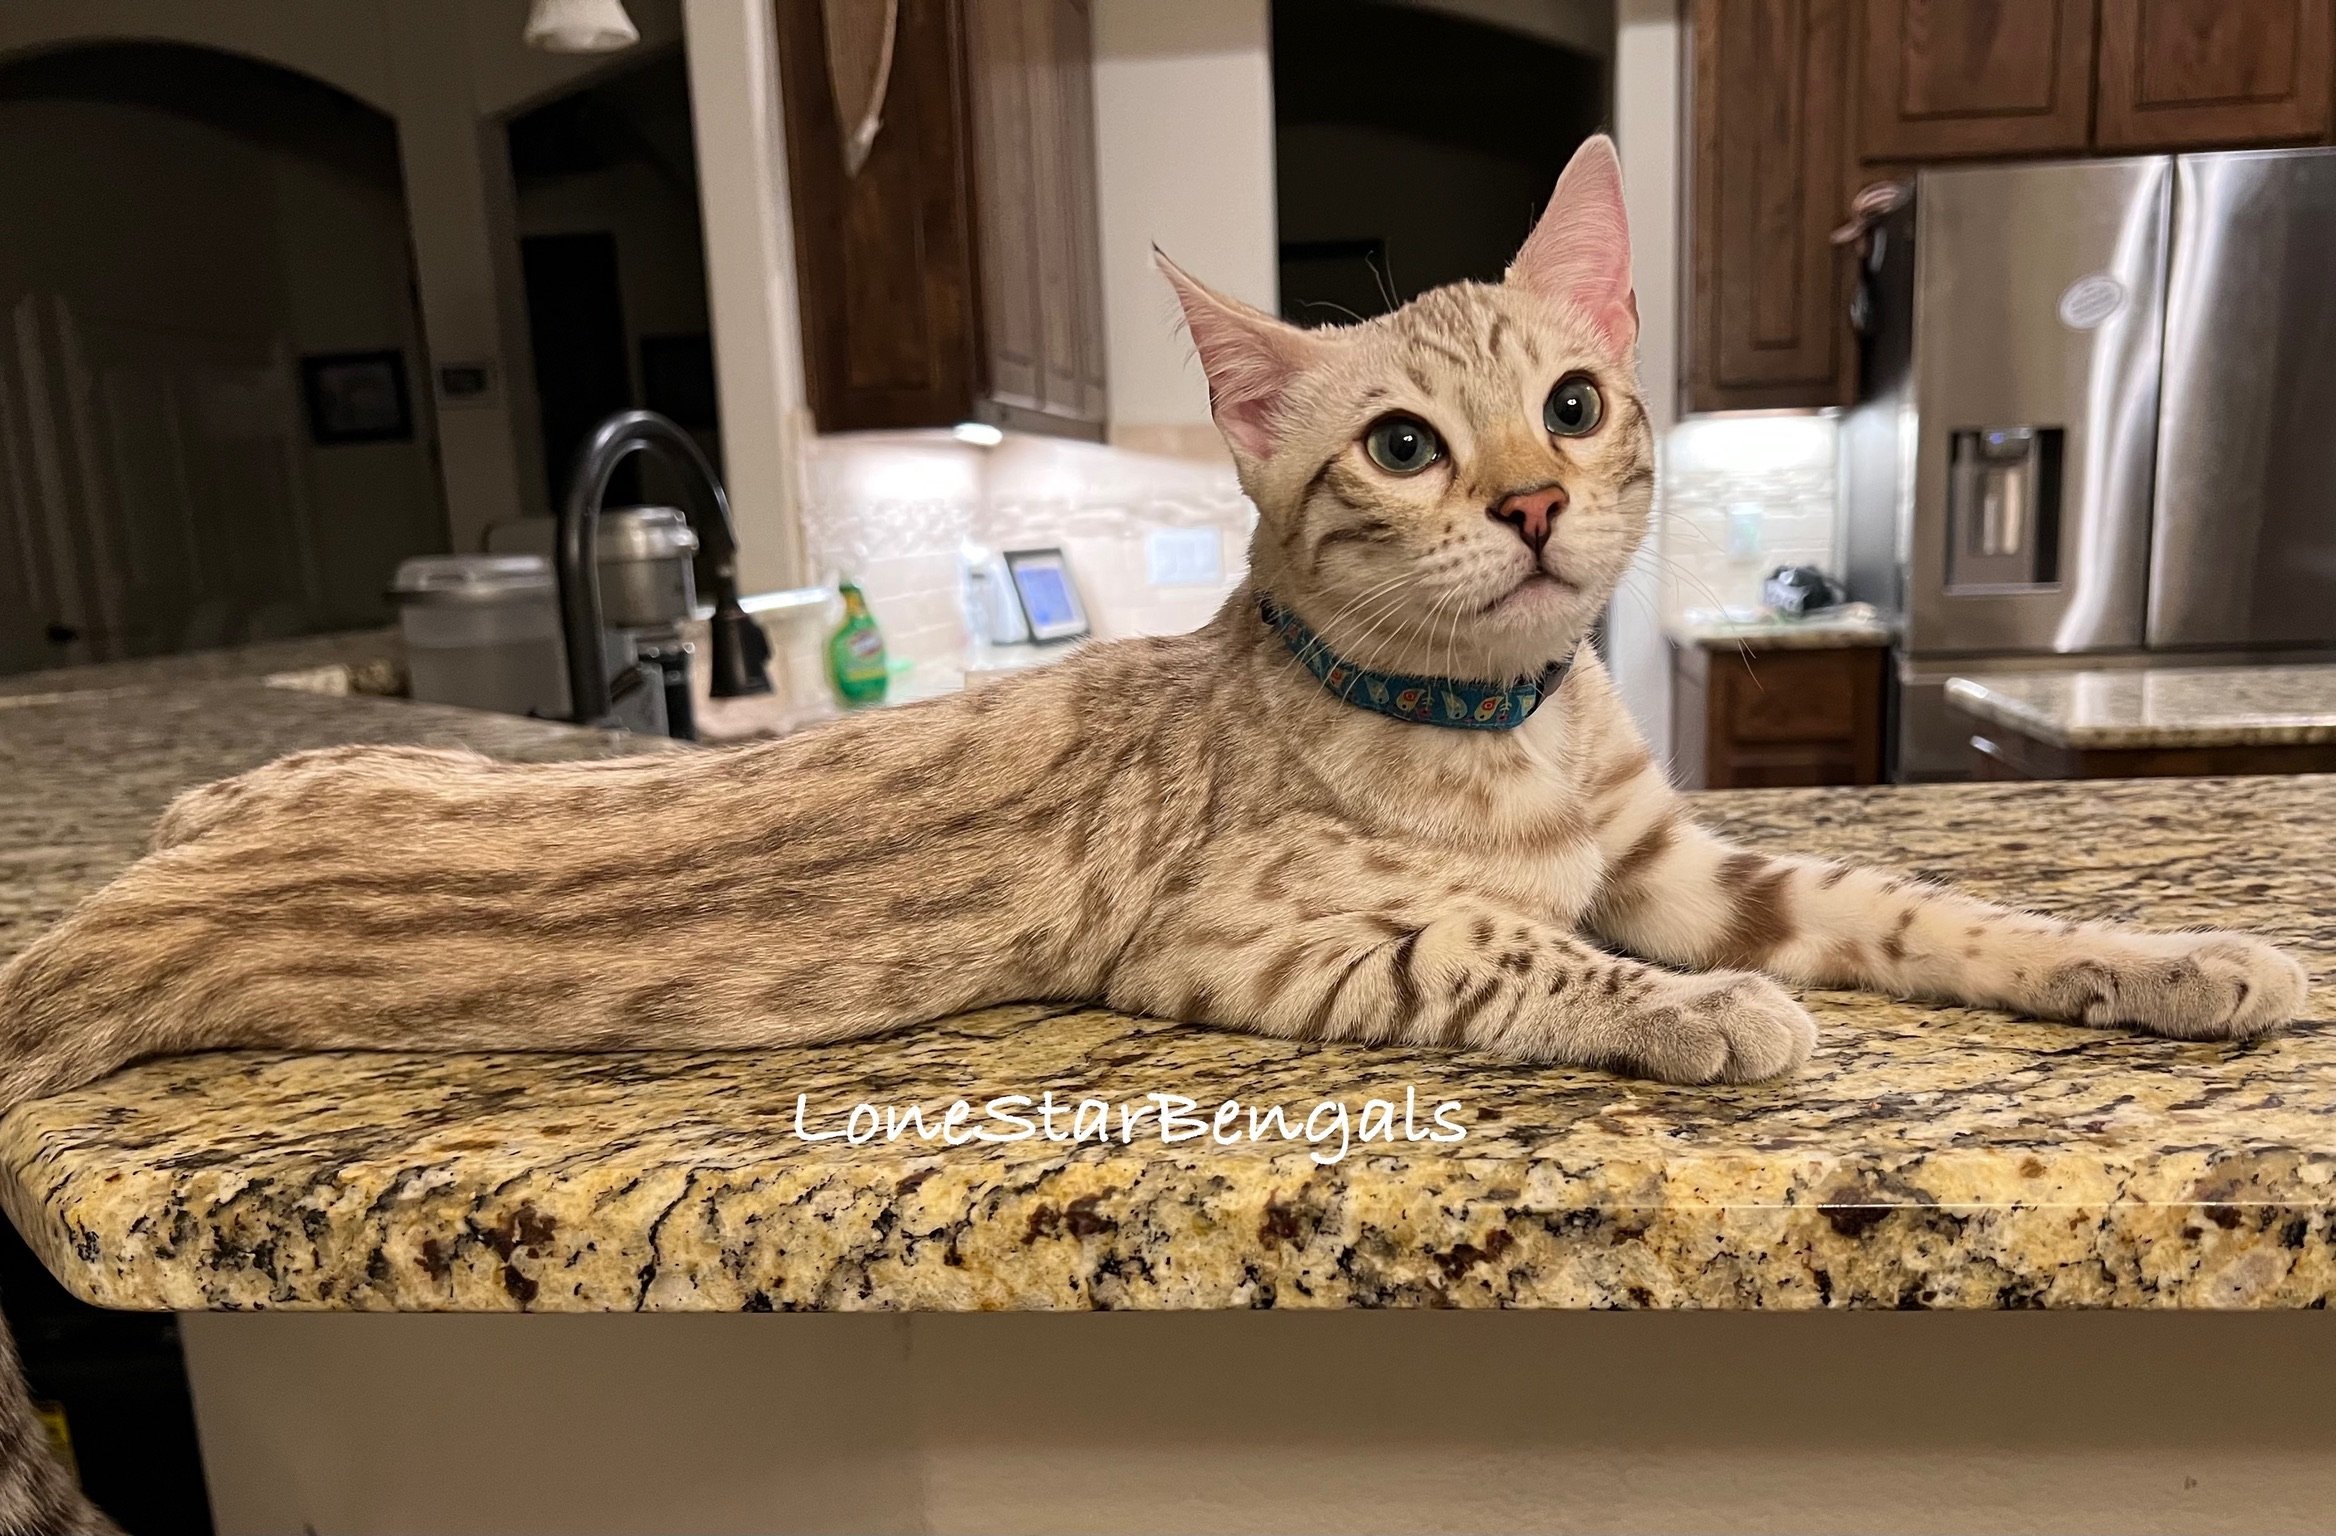 An award-winning Bengal breeder's feline passion, a Bengal cat, captured gracefully lounging on a kitchen counter in Texas.